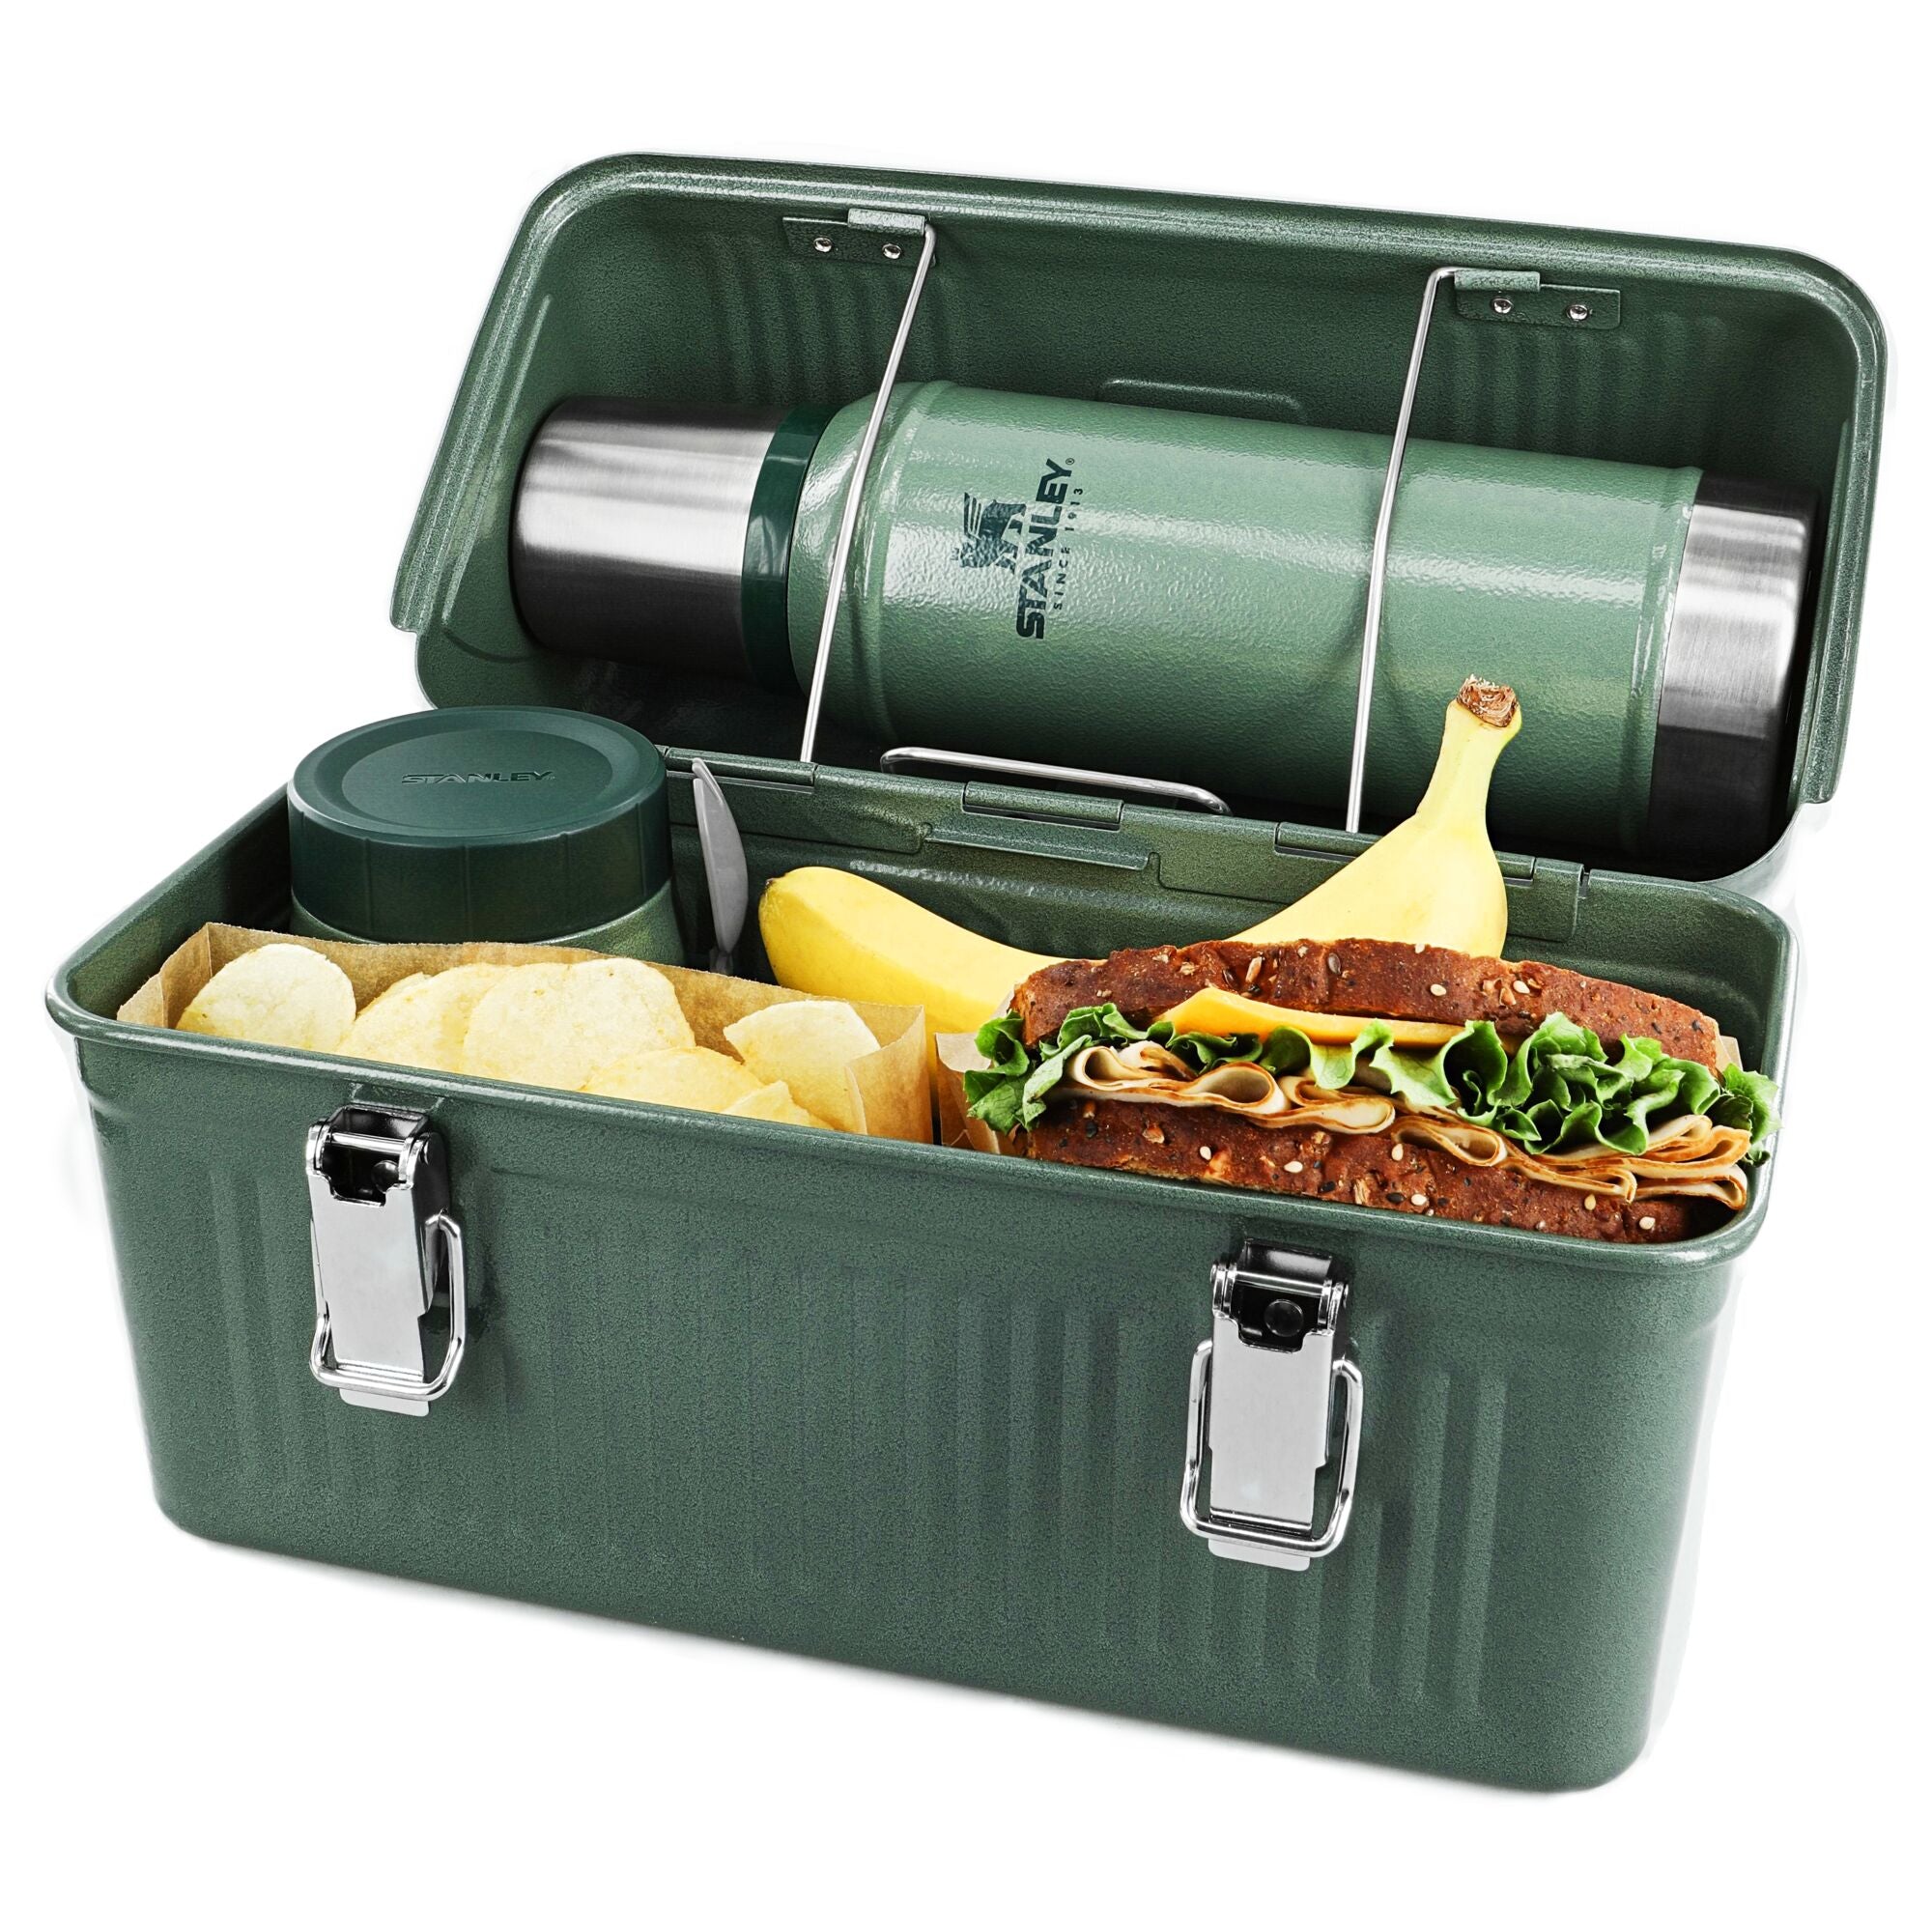 Stanley Lunch Box with Thermos - household items - by owner